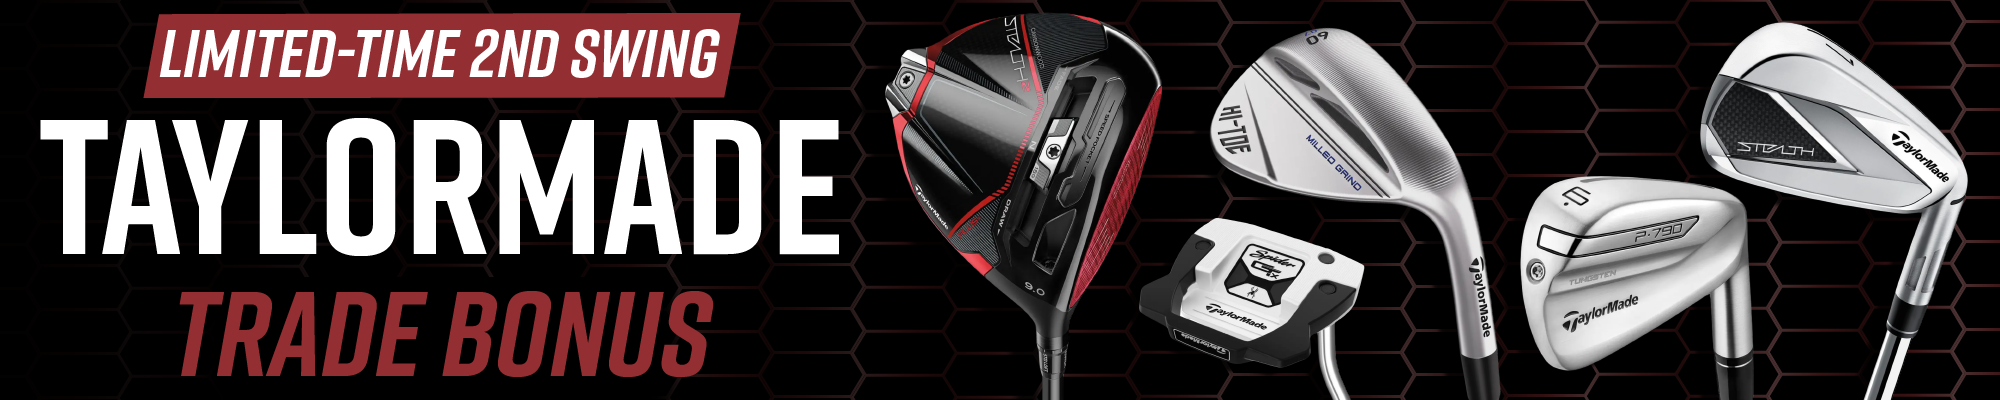 Limited-Time 2nd Swing Taylormade Trade Bonus